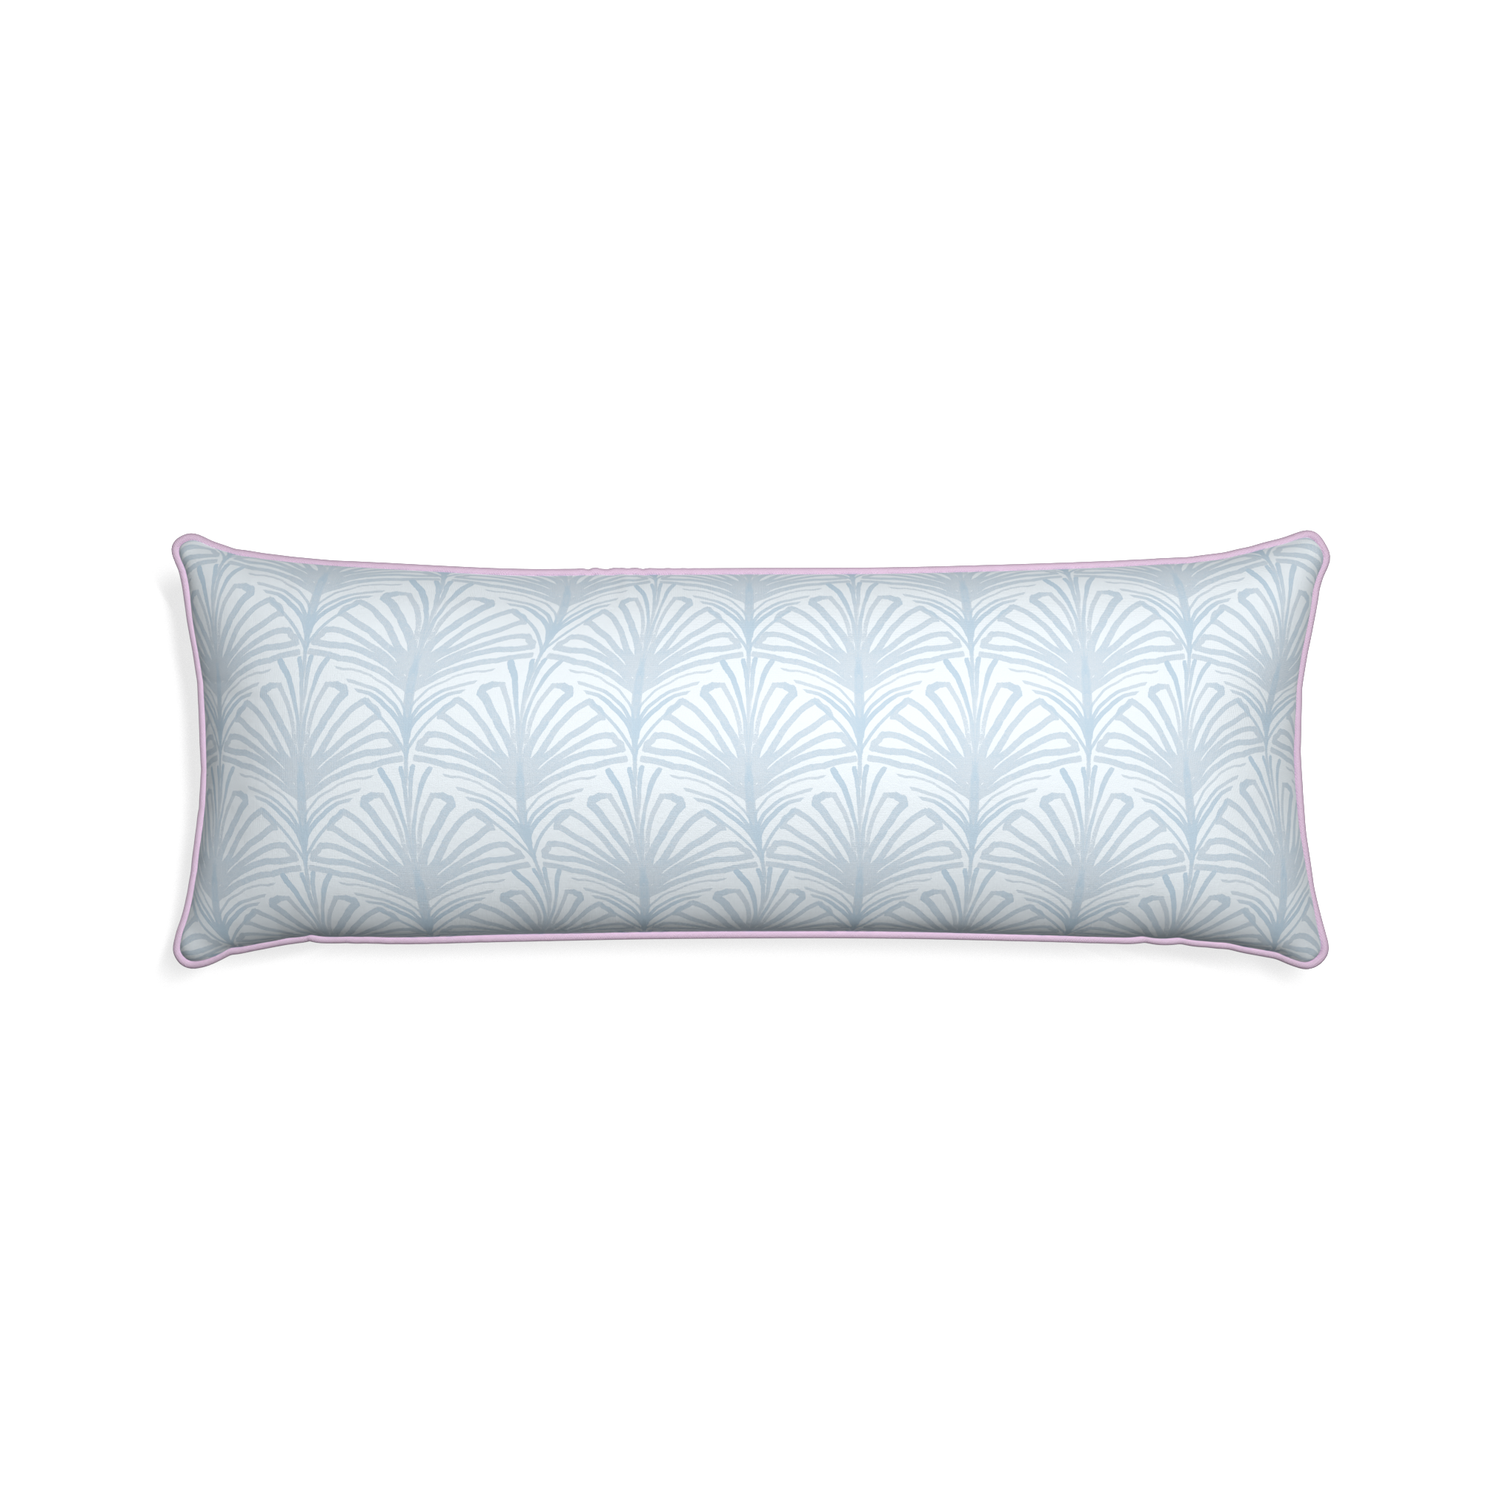 Xl-lumbar suzy sky custom pillow with l piping on white background